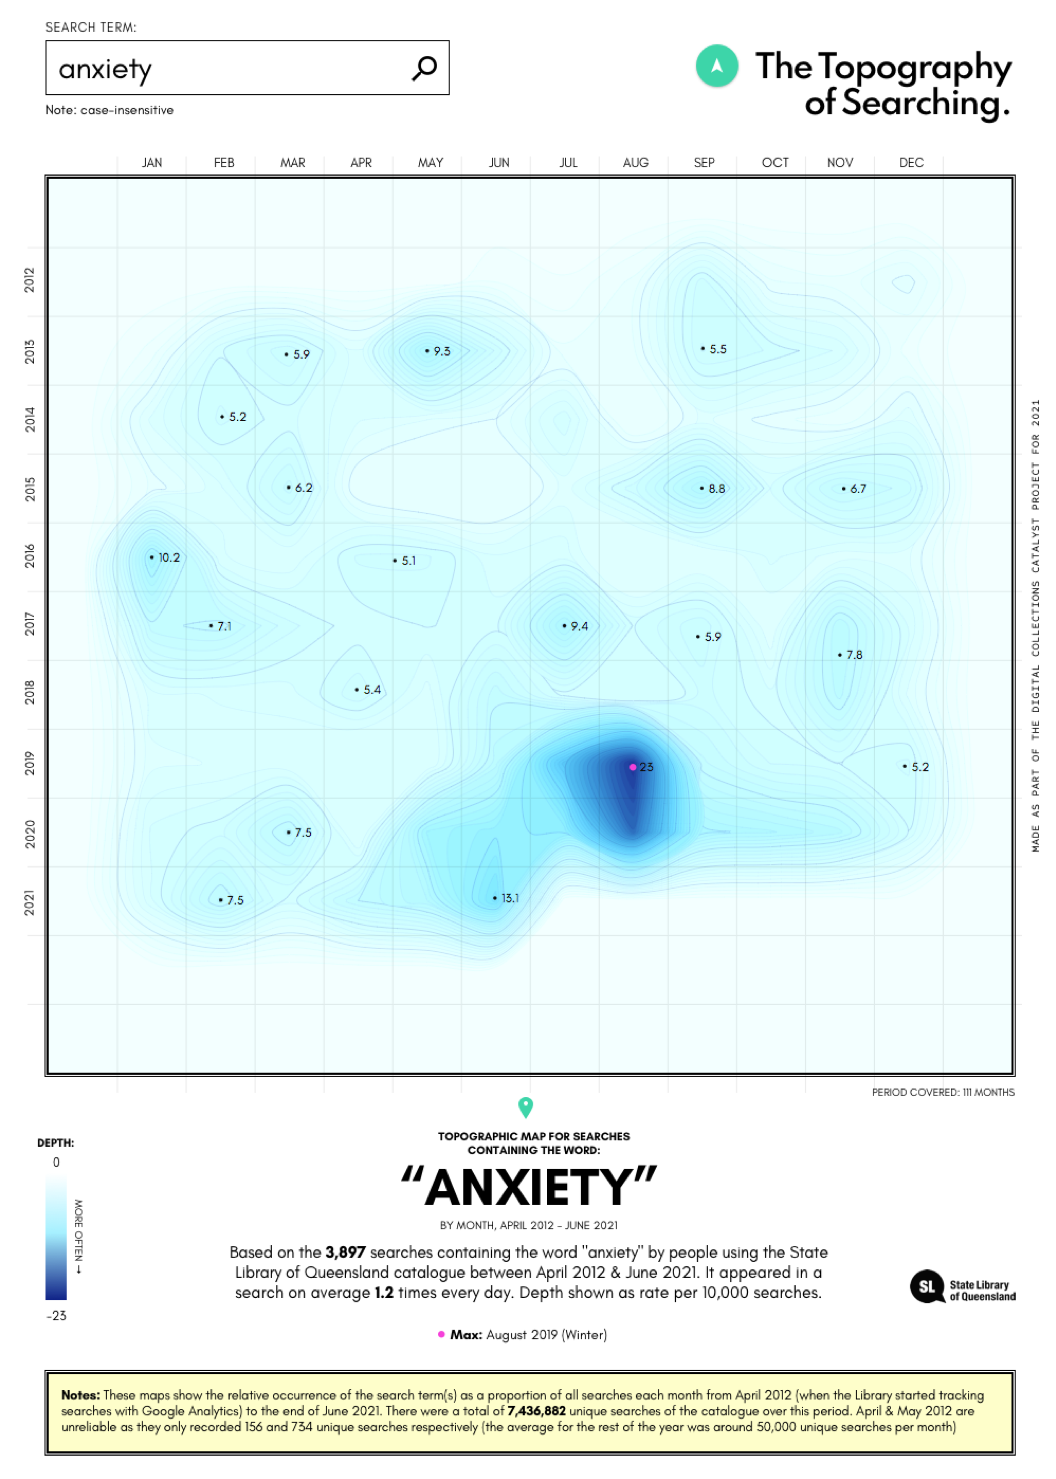 2D topographic map showing search results for the search term anxiety